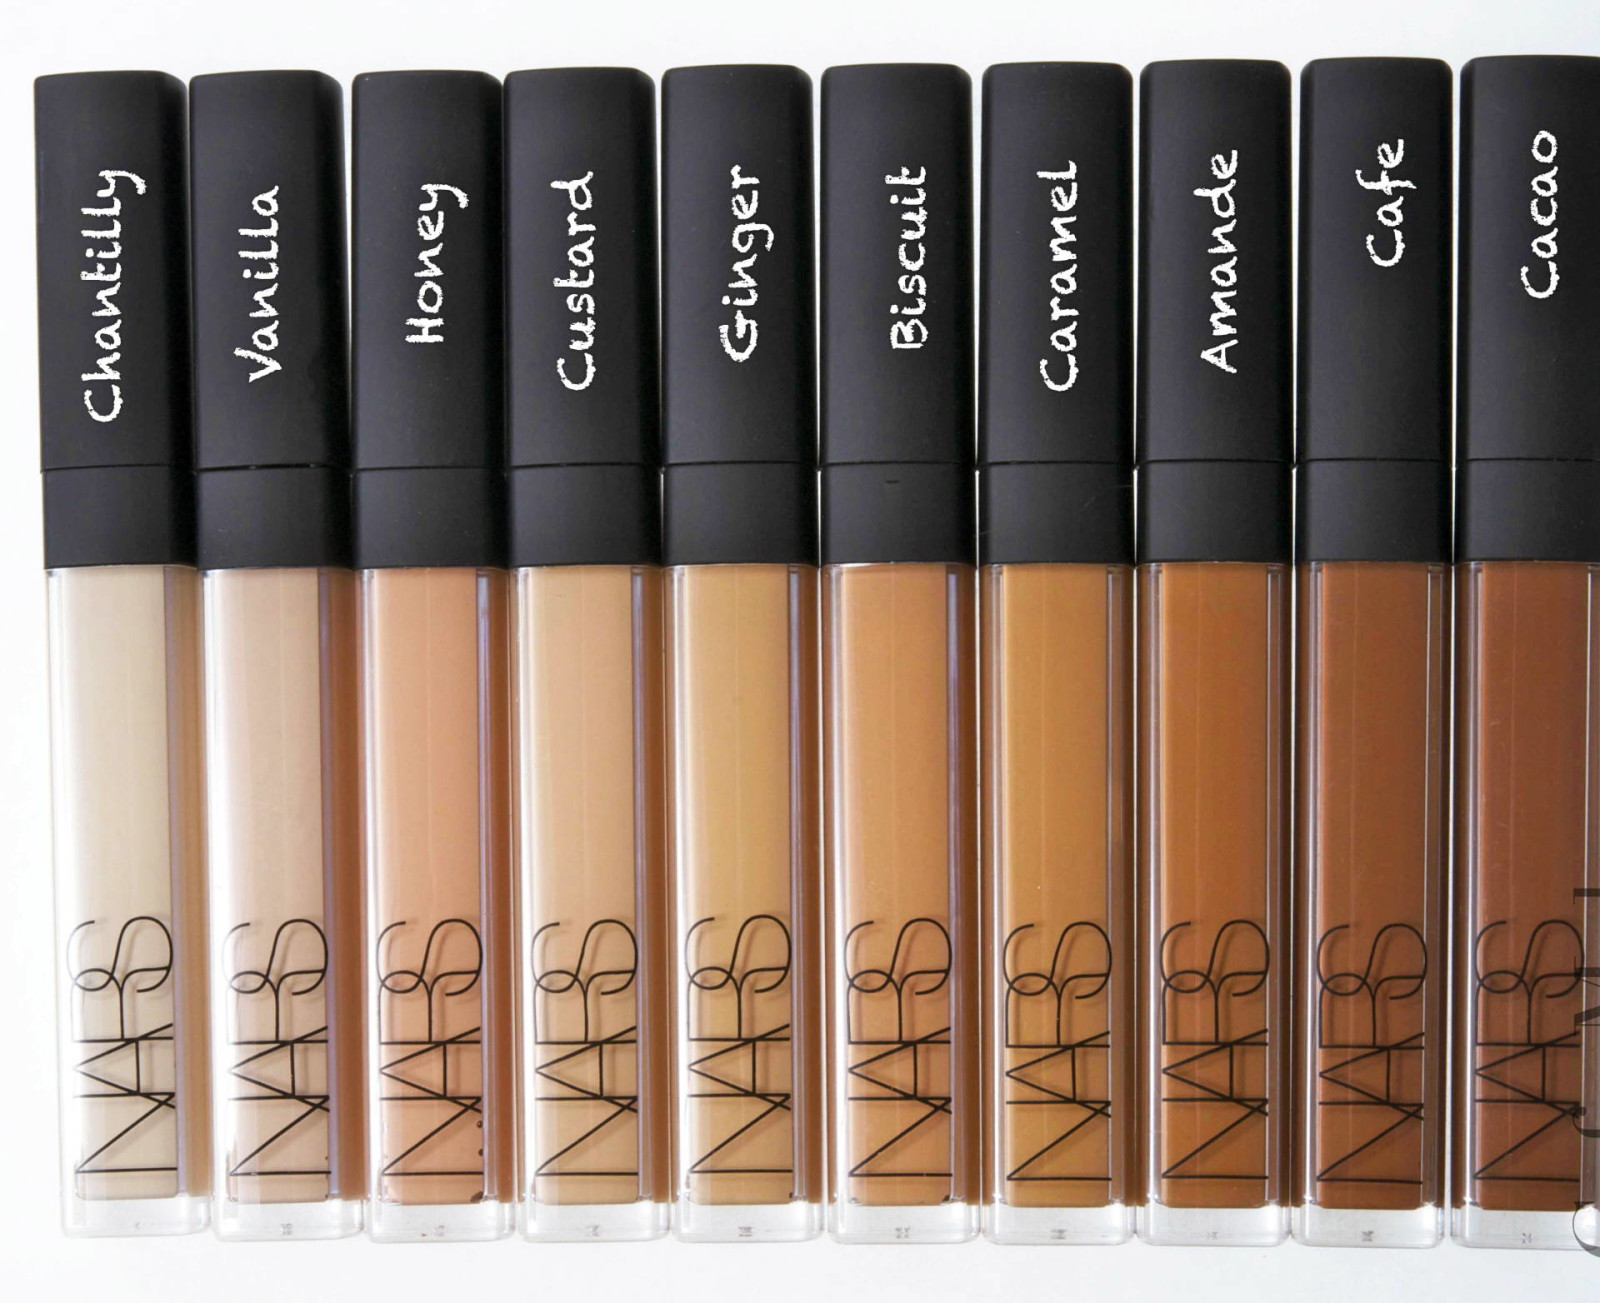 NARS Creamy Concealer is perfect for all skin types